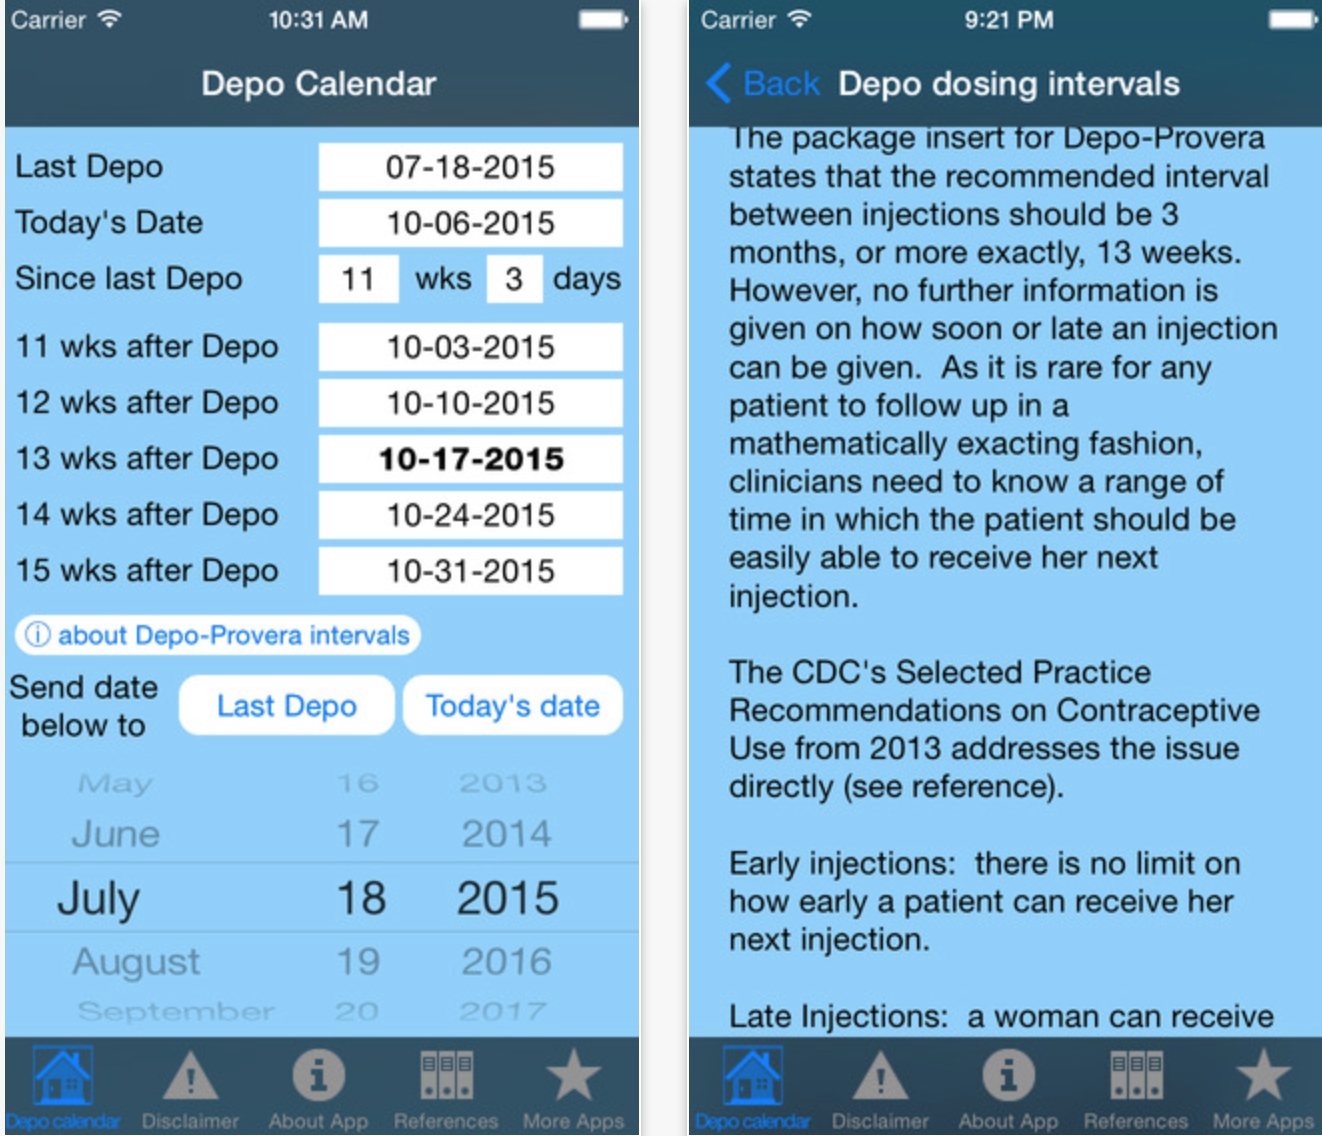 Depo Calendar App Could Significantly Improve Contraception